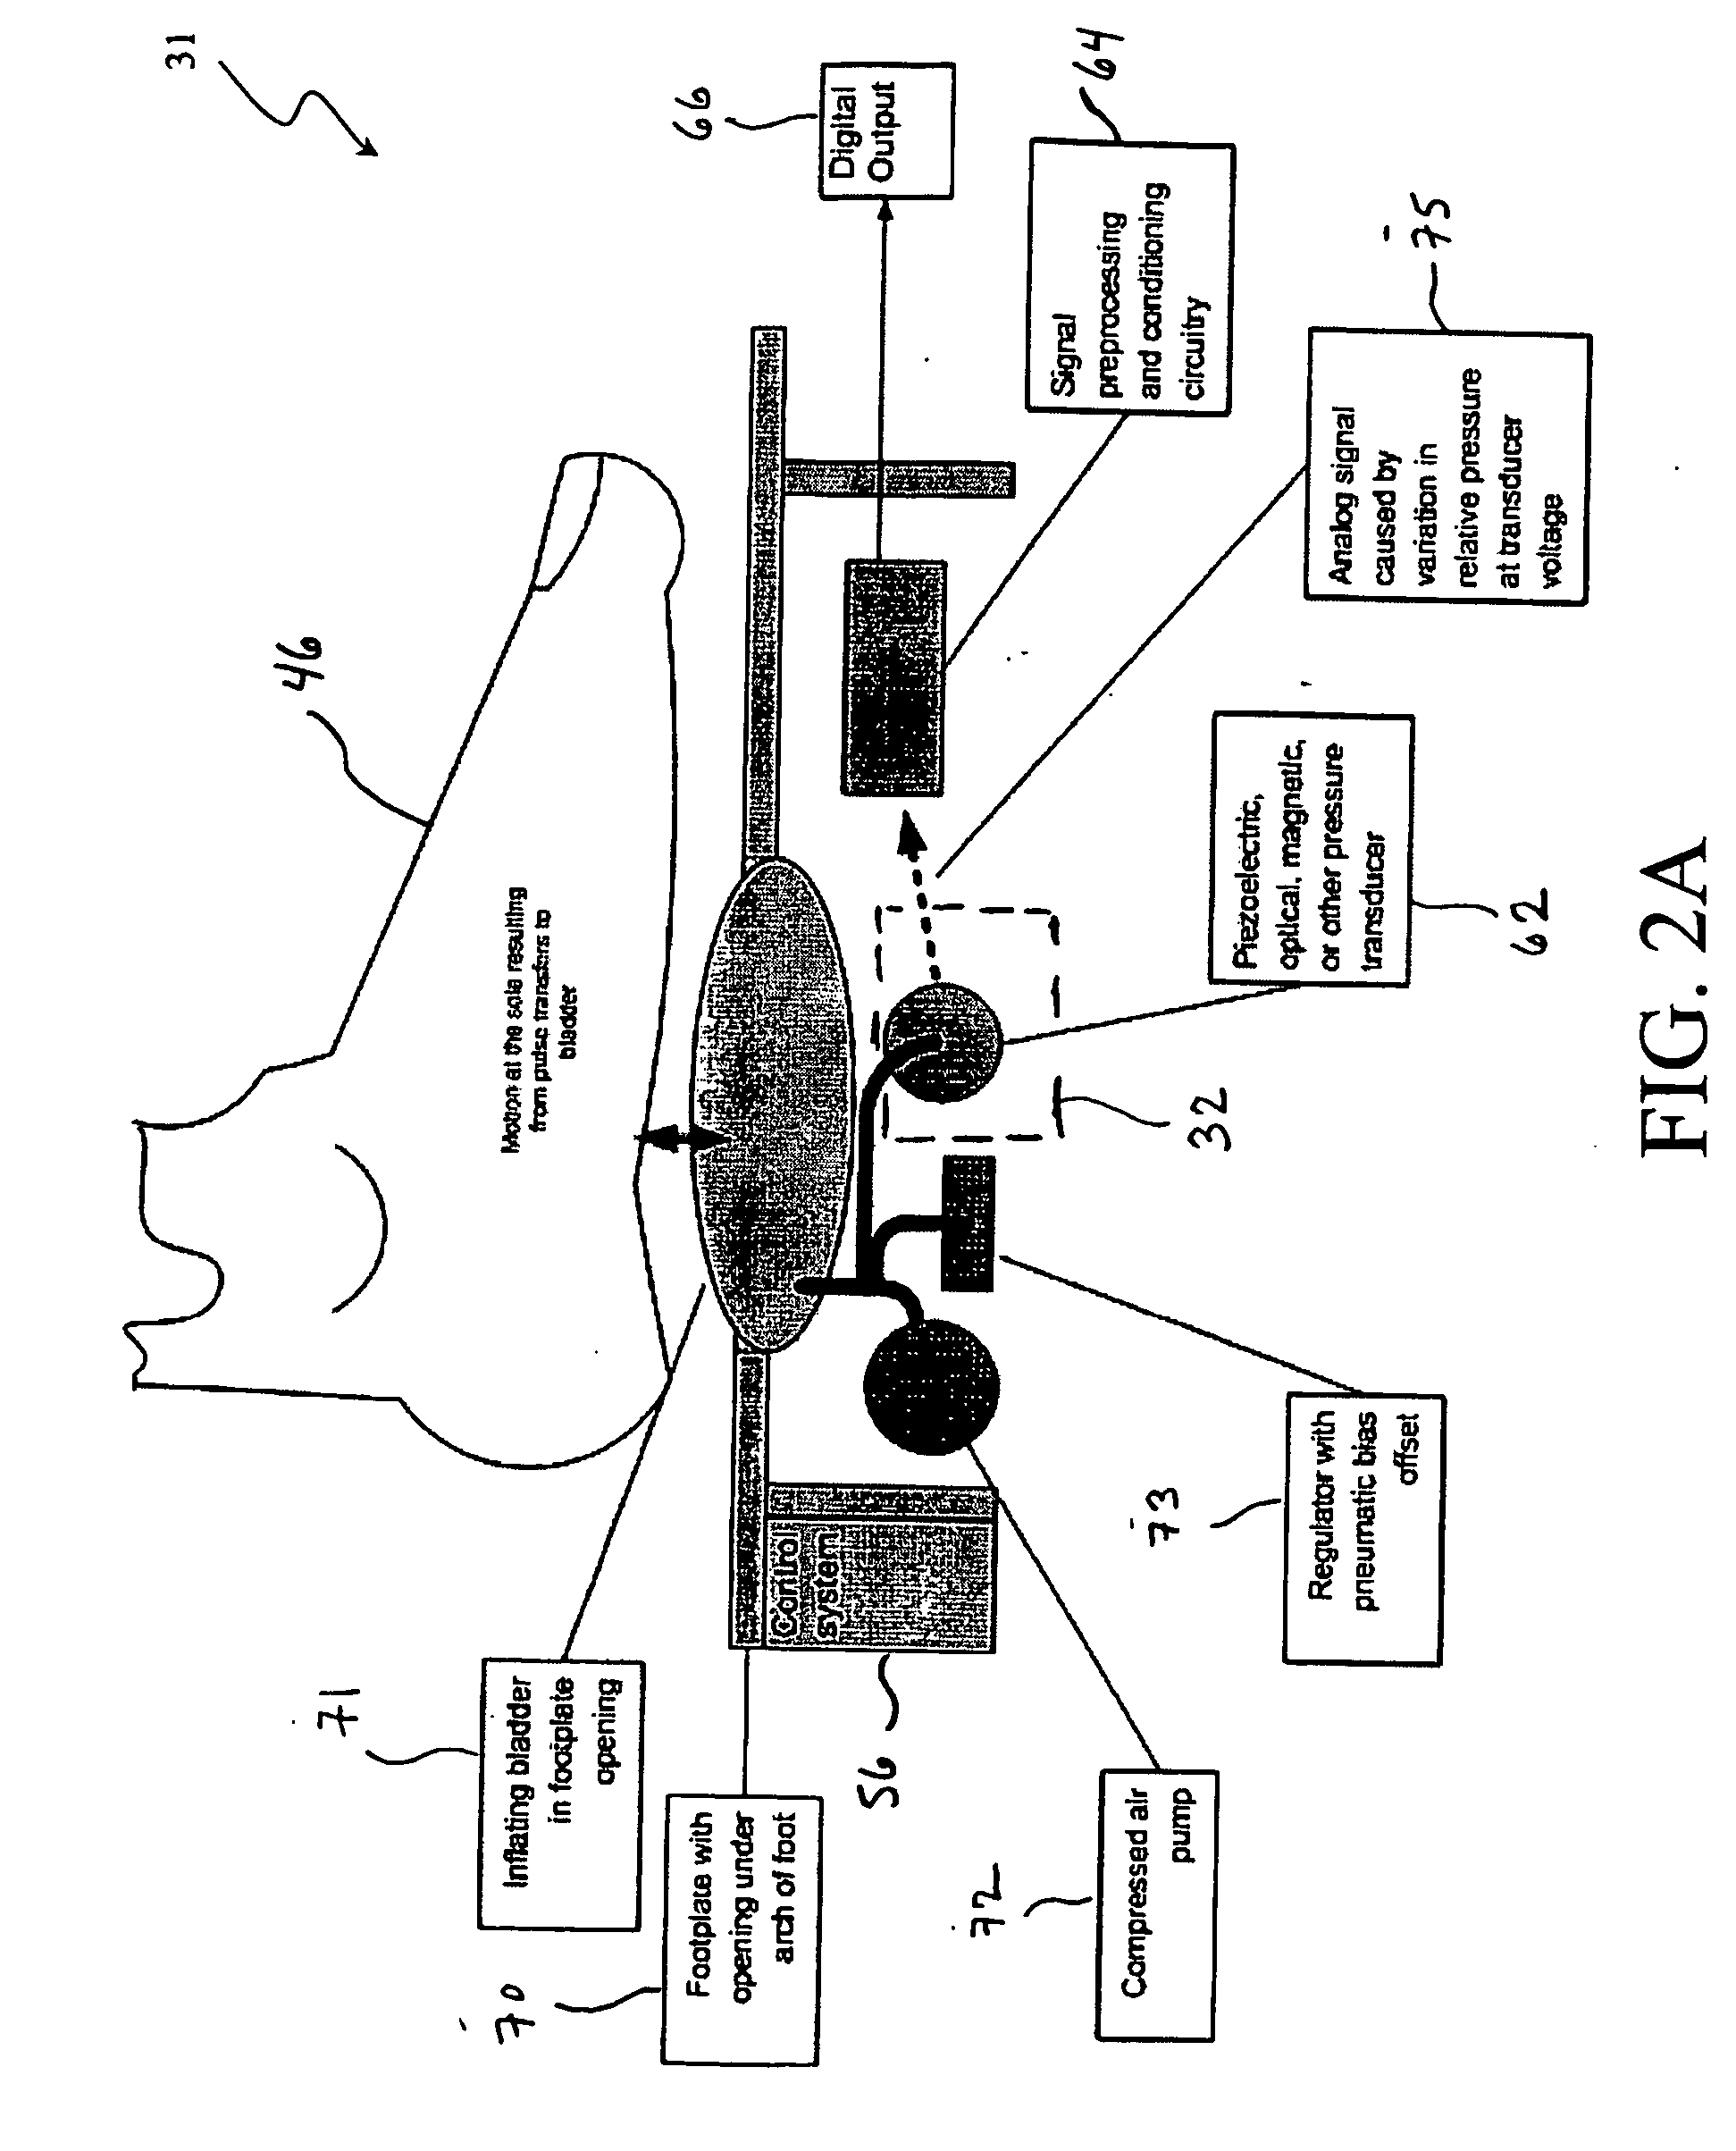 System and method for passive monitoring of blood pressure and pulse rate